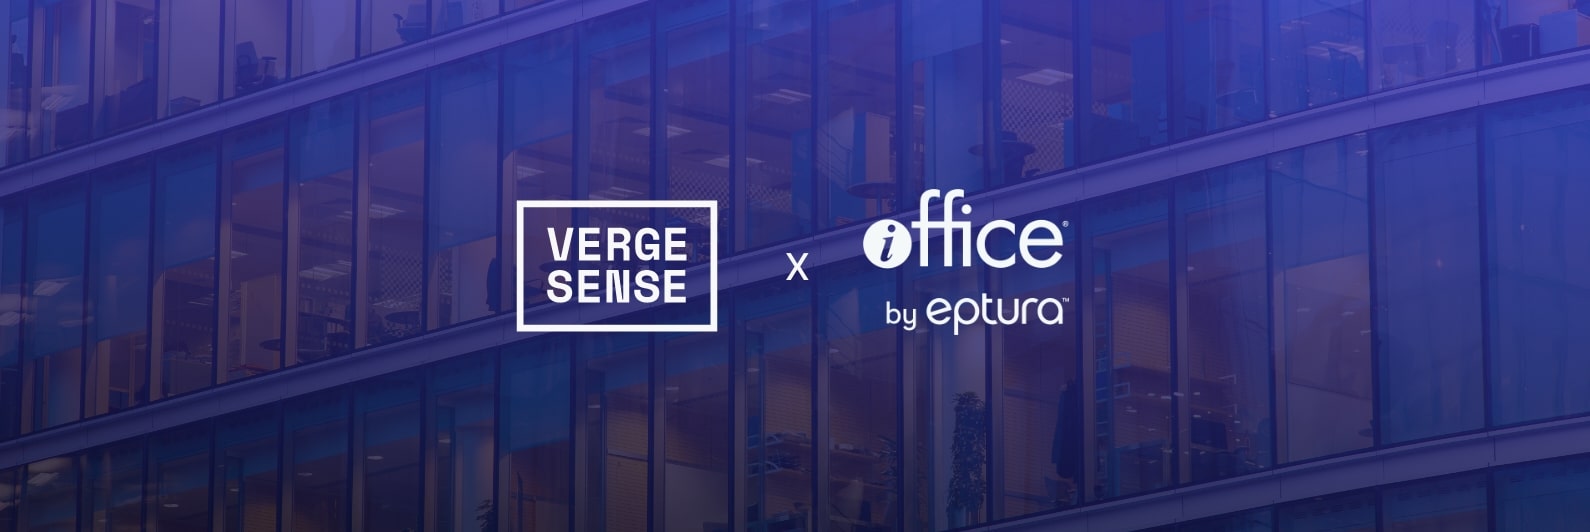 VergeSense Partnership with iOFFICE by Eptura Enables Organizations to Easily Make Data-Driven Decisions